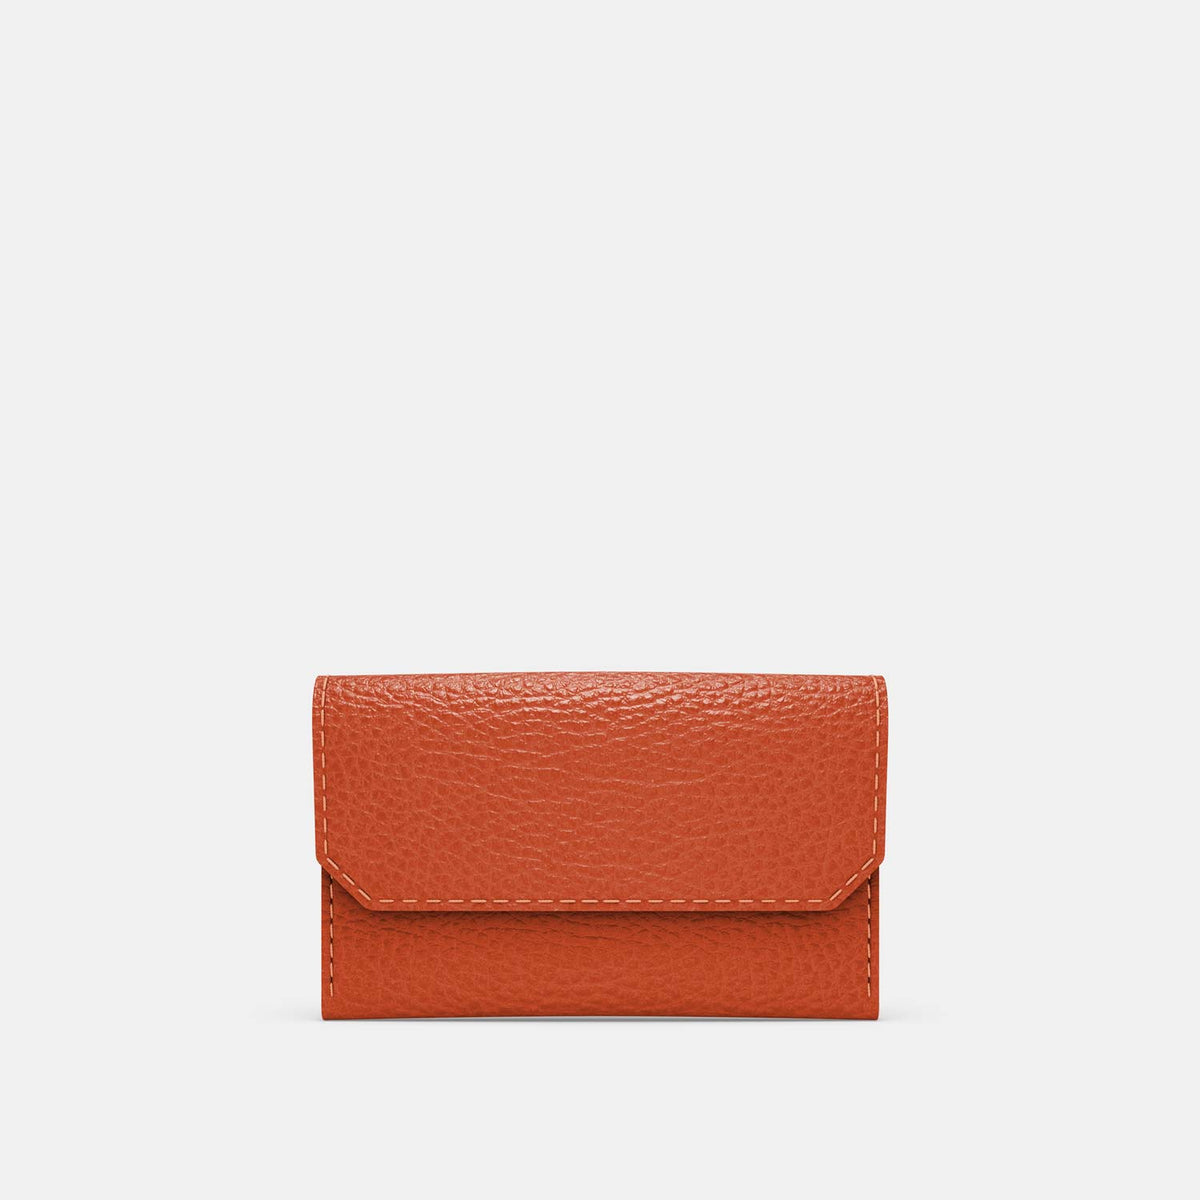 Leather Carry-all Wallet - Orange and Beige - RYAN London